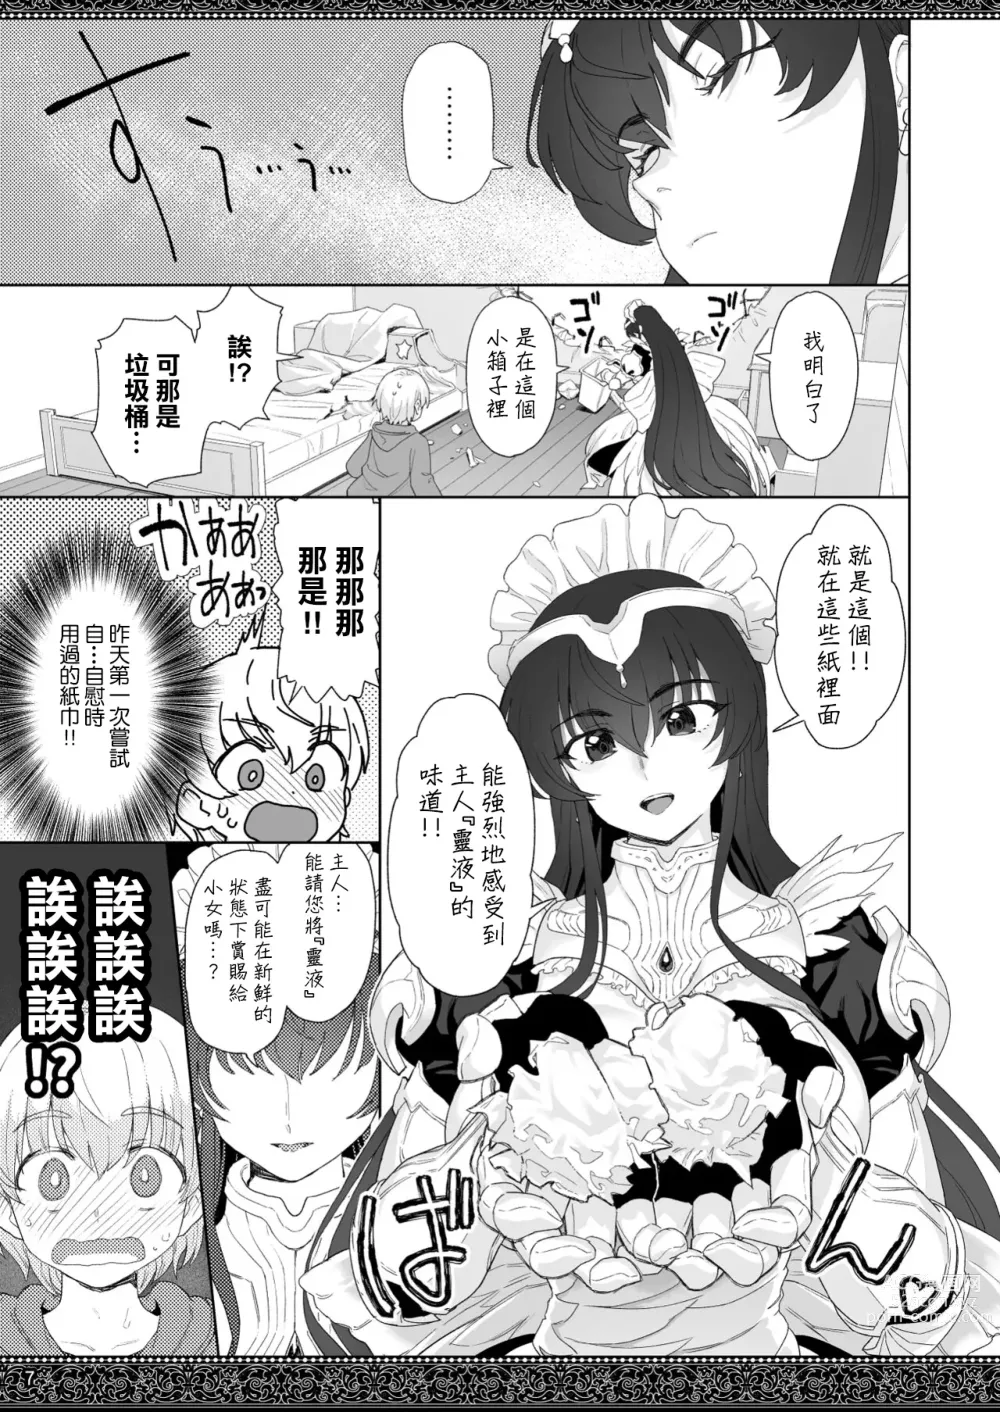 Page 7 of doujinshi 天上世界的女僕們